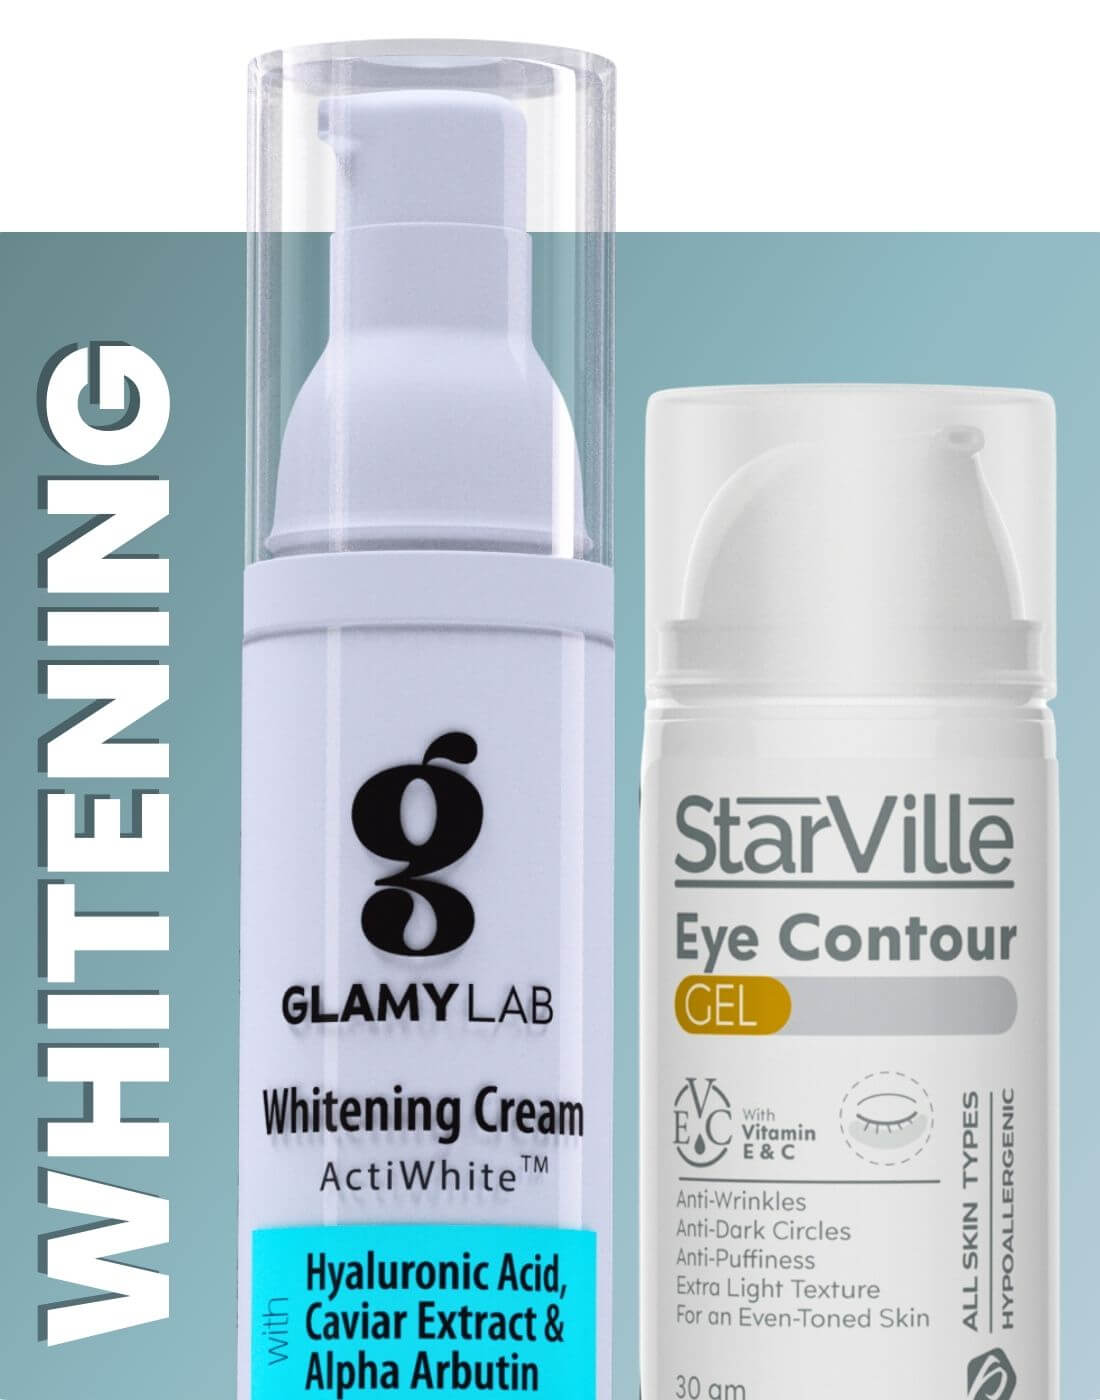 Whitening and Even Tone Skin Products